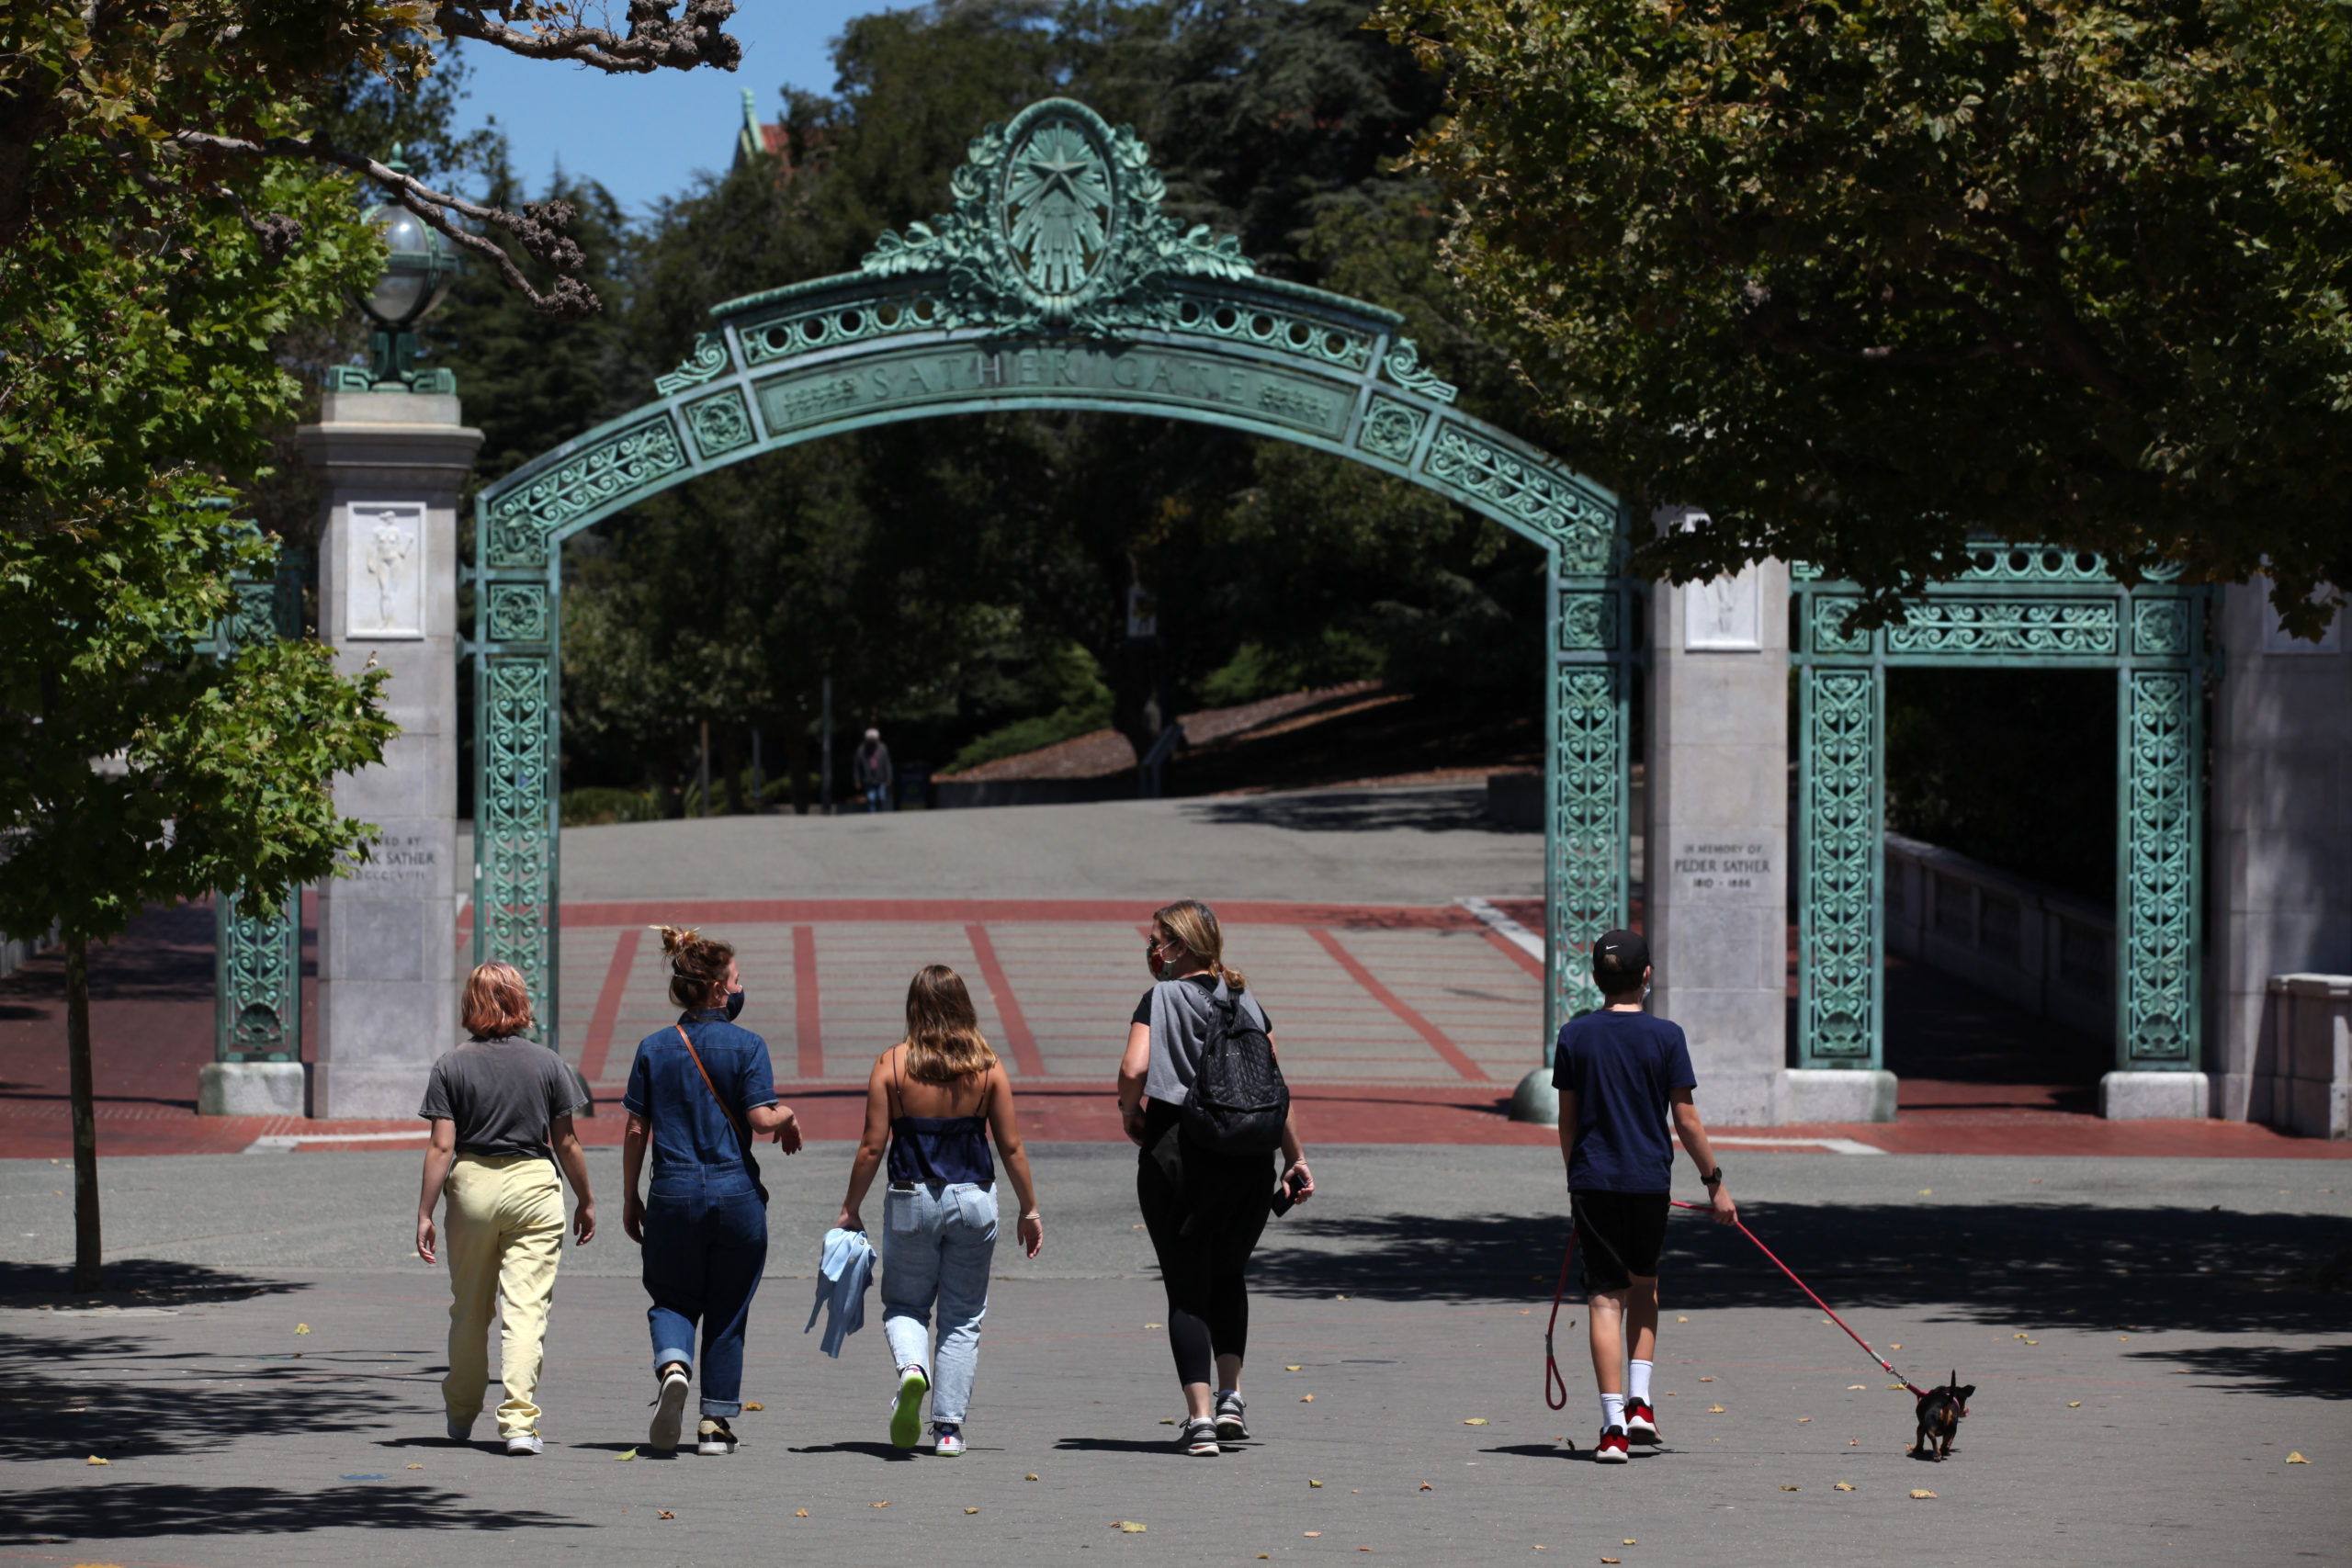 People walk towards Sather Gate on the U.C. Berkeley campus on July 22, 2020 in Berkeley, California. U.C. Berkeley announced plans on Tuesday to move to online education for the start of the school's fall semester due to the coronavirus COVID-19 pandemic. (Photo by Justin Sullivan/Getty Images)